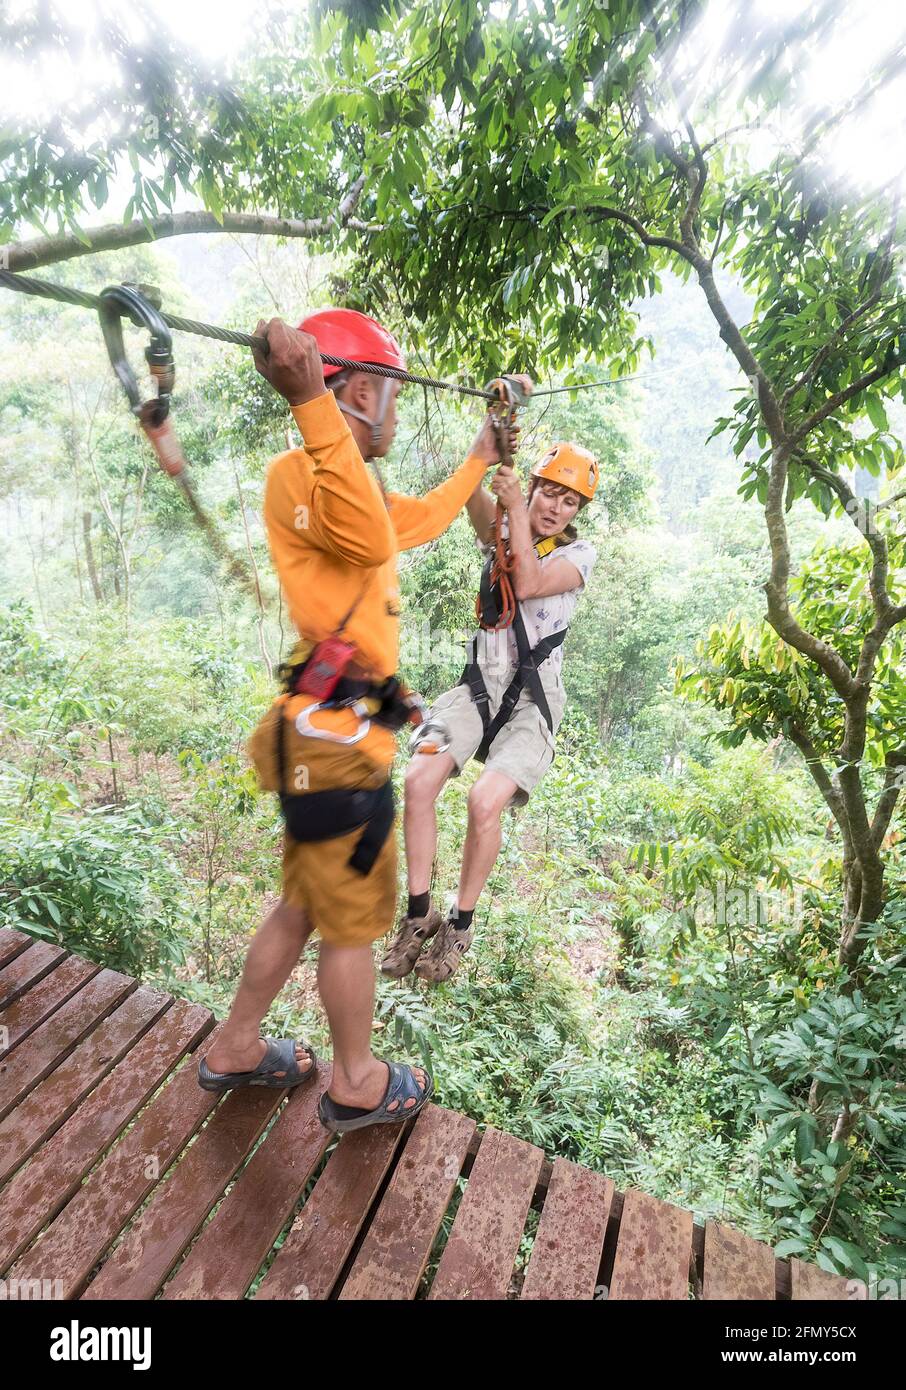 Stage landing for zip wire experience, Tadfane Resort, Paksong, Laos Stock Photo